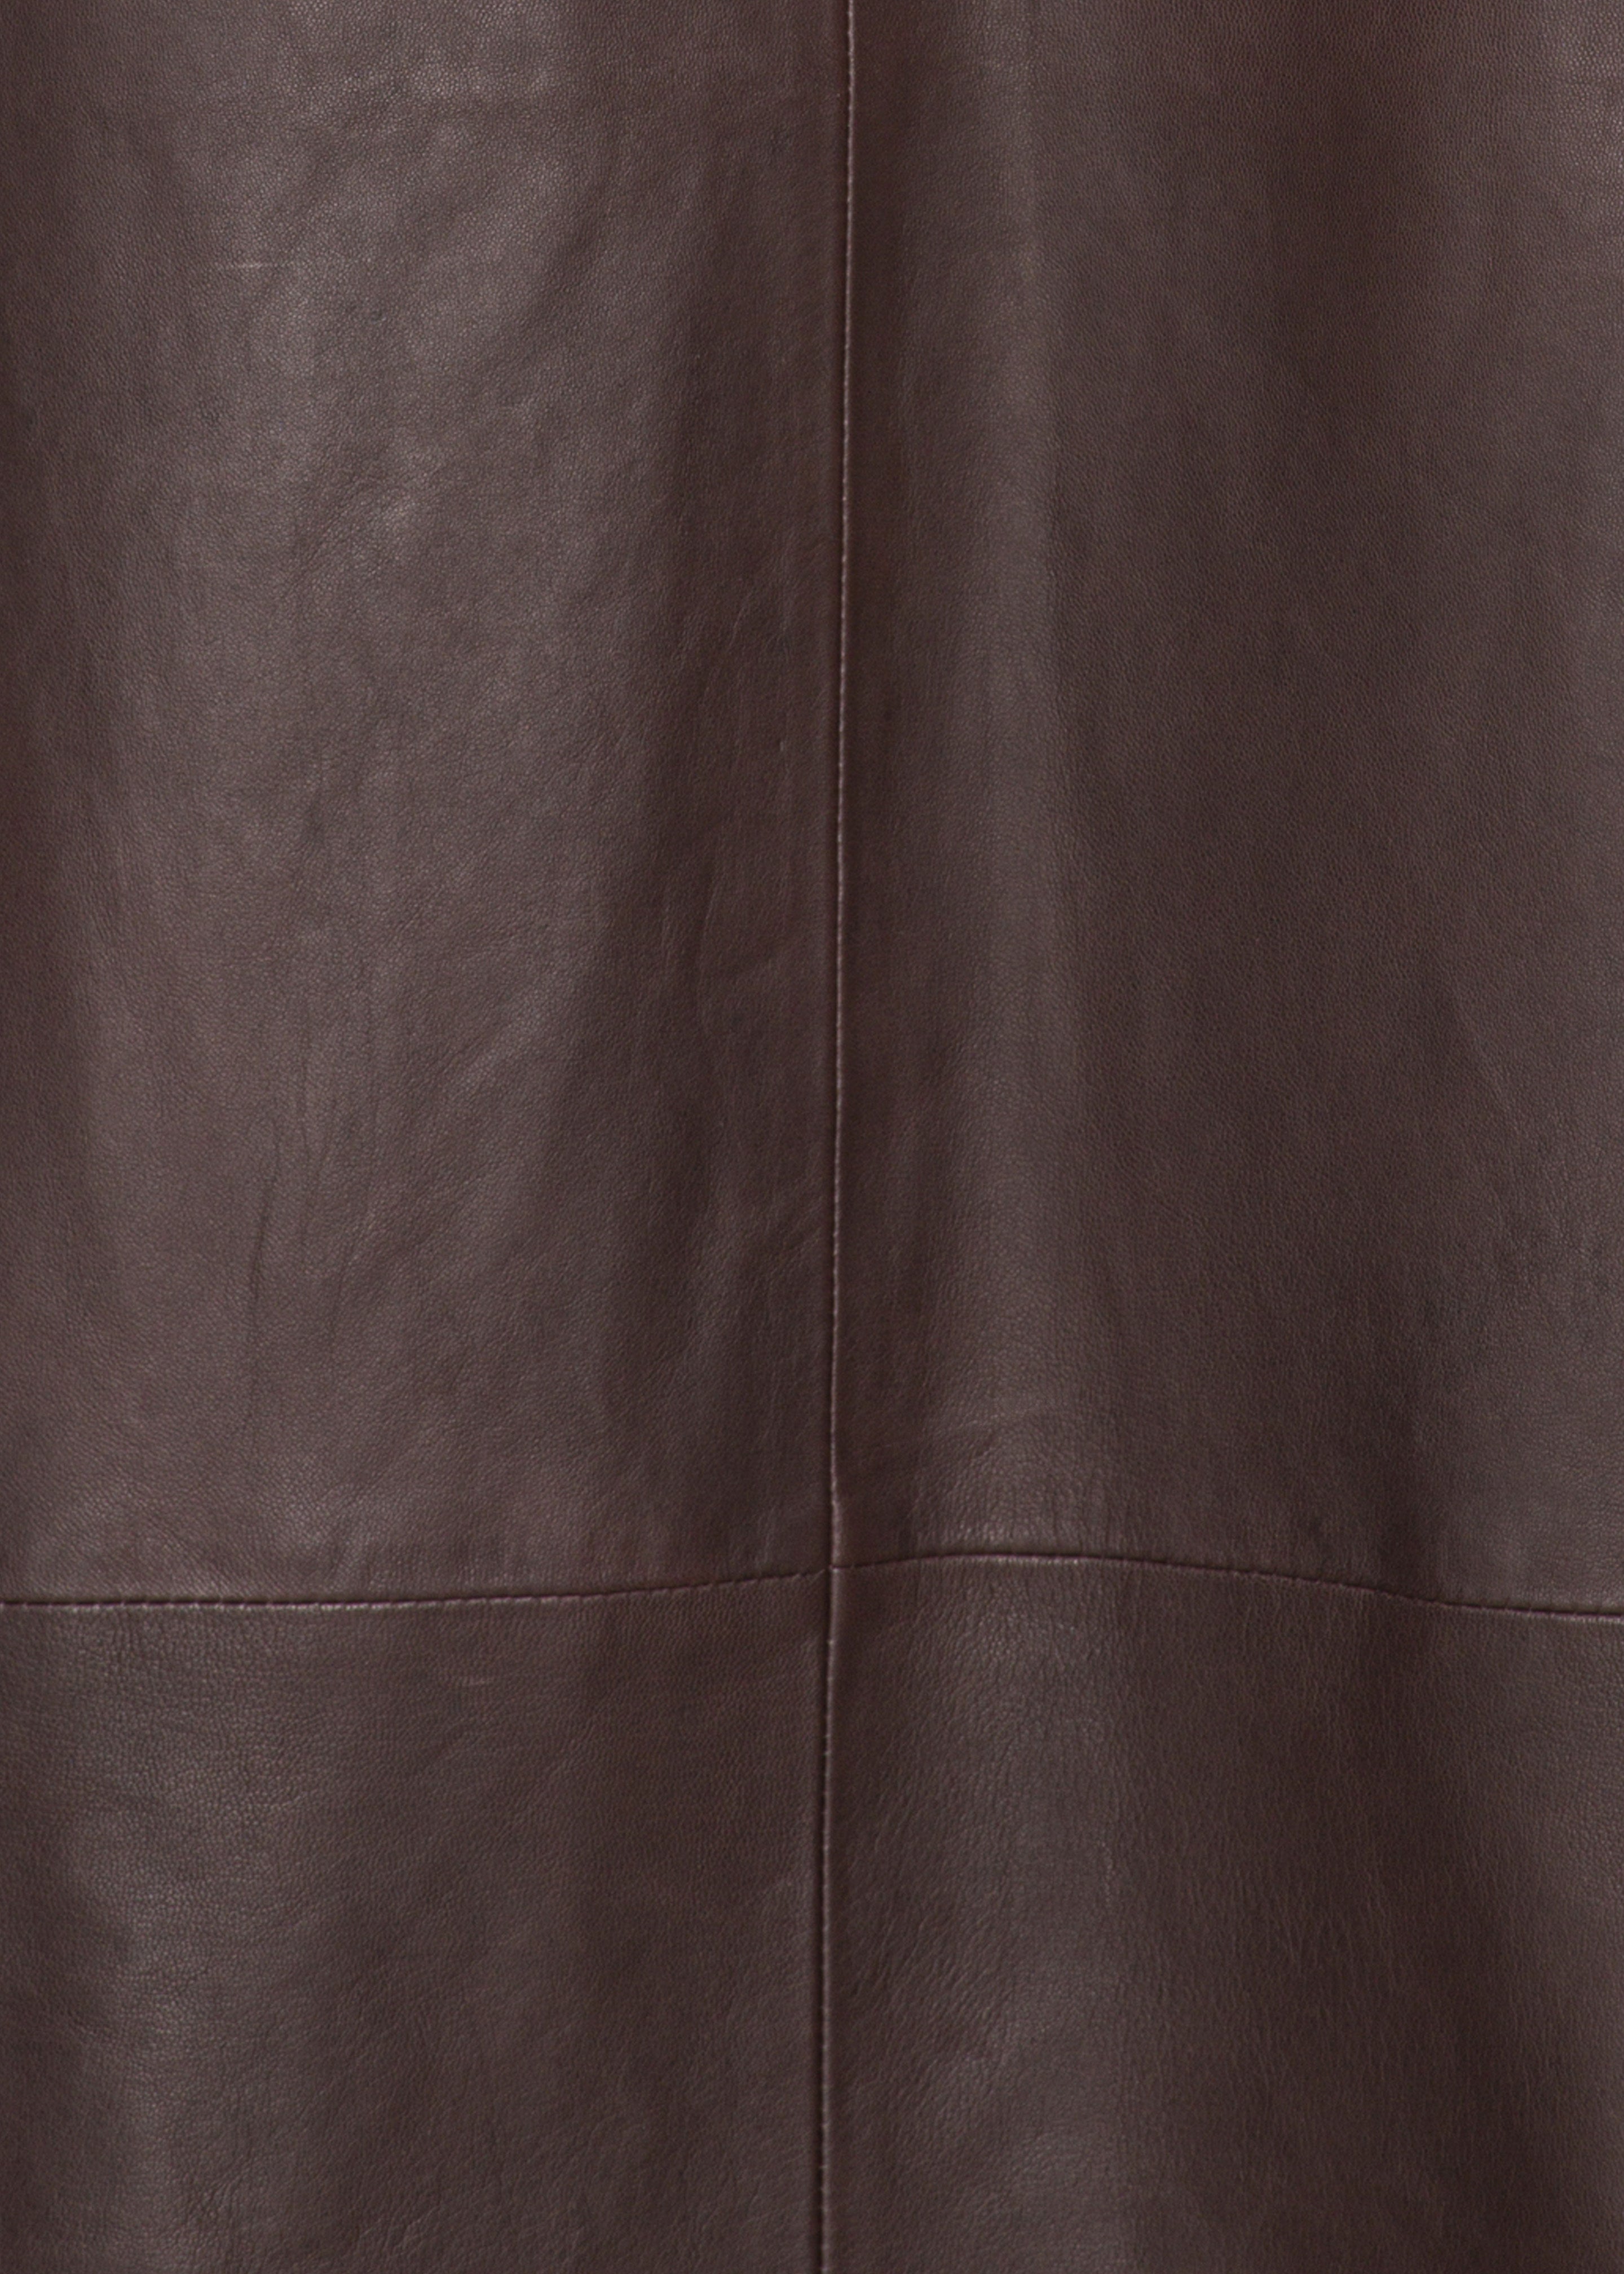 REMAIN Leather Vest - Coffee Bean - 5